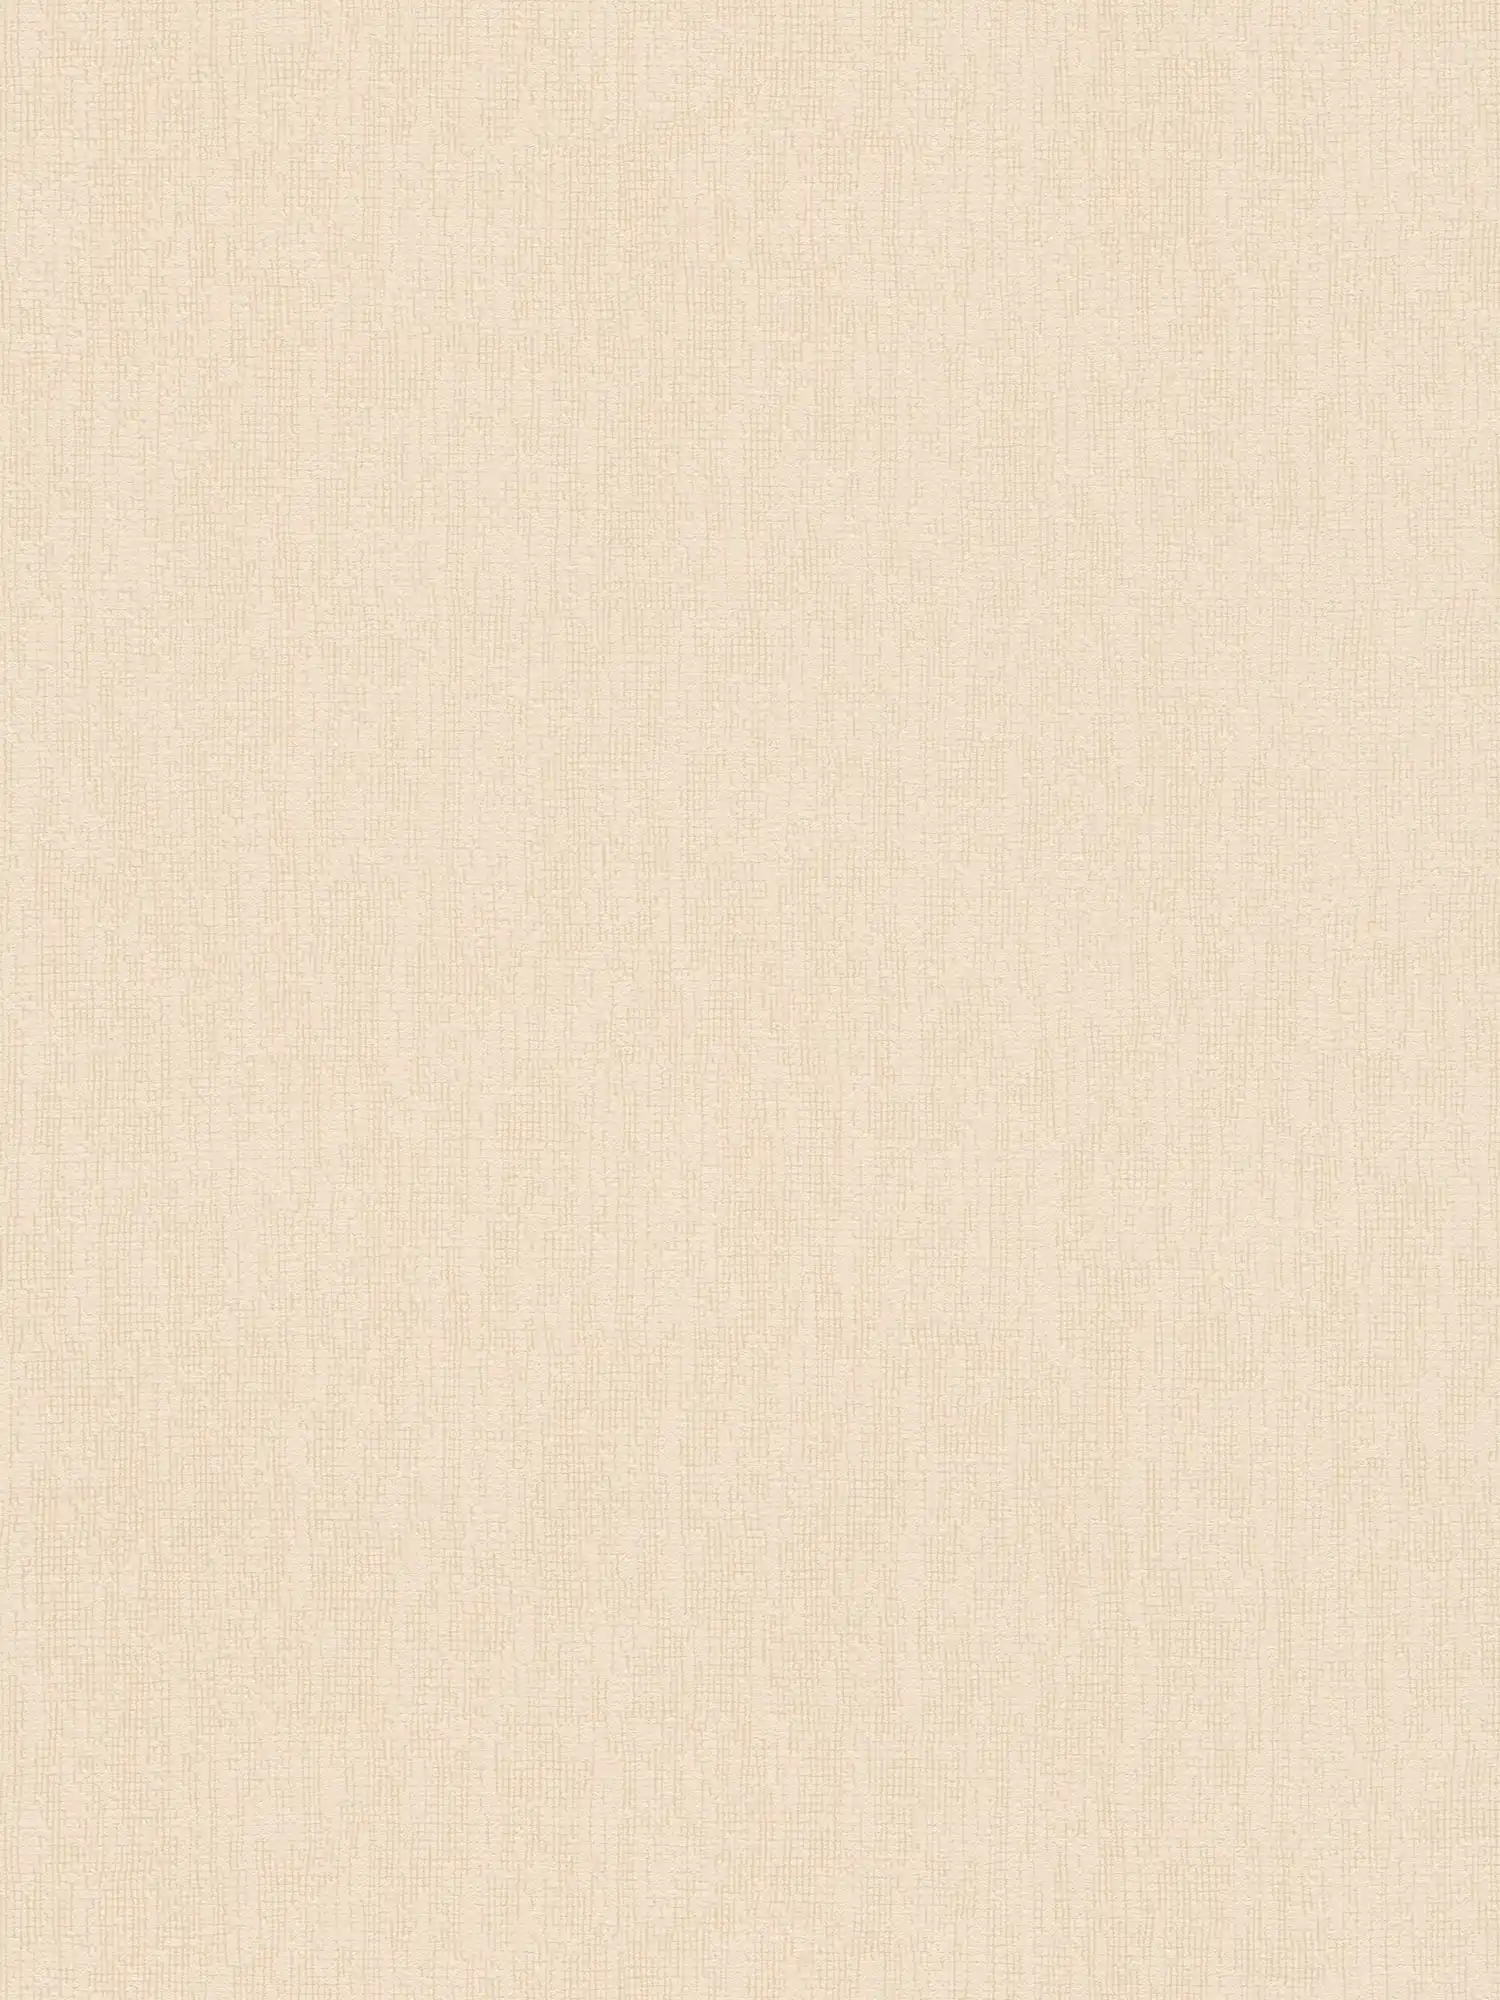 Beige wallpaper plain with texture details in Scandi style
